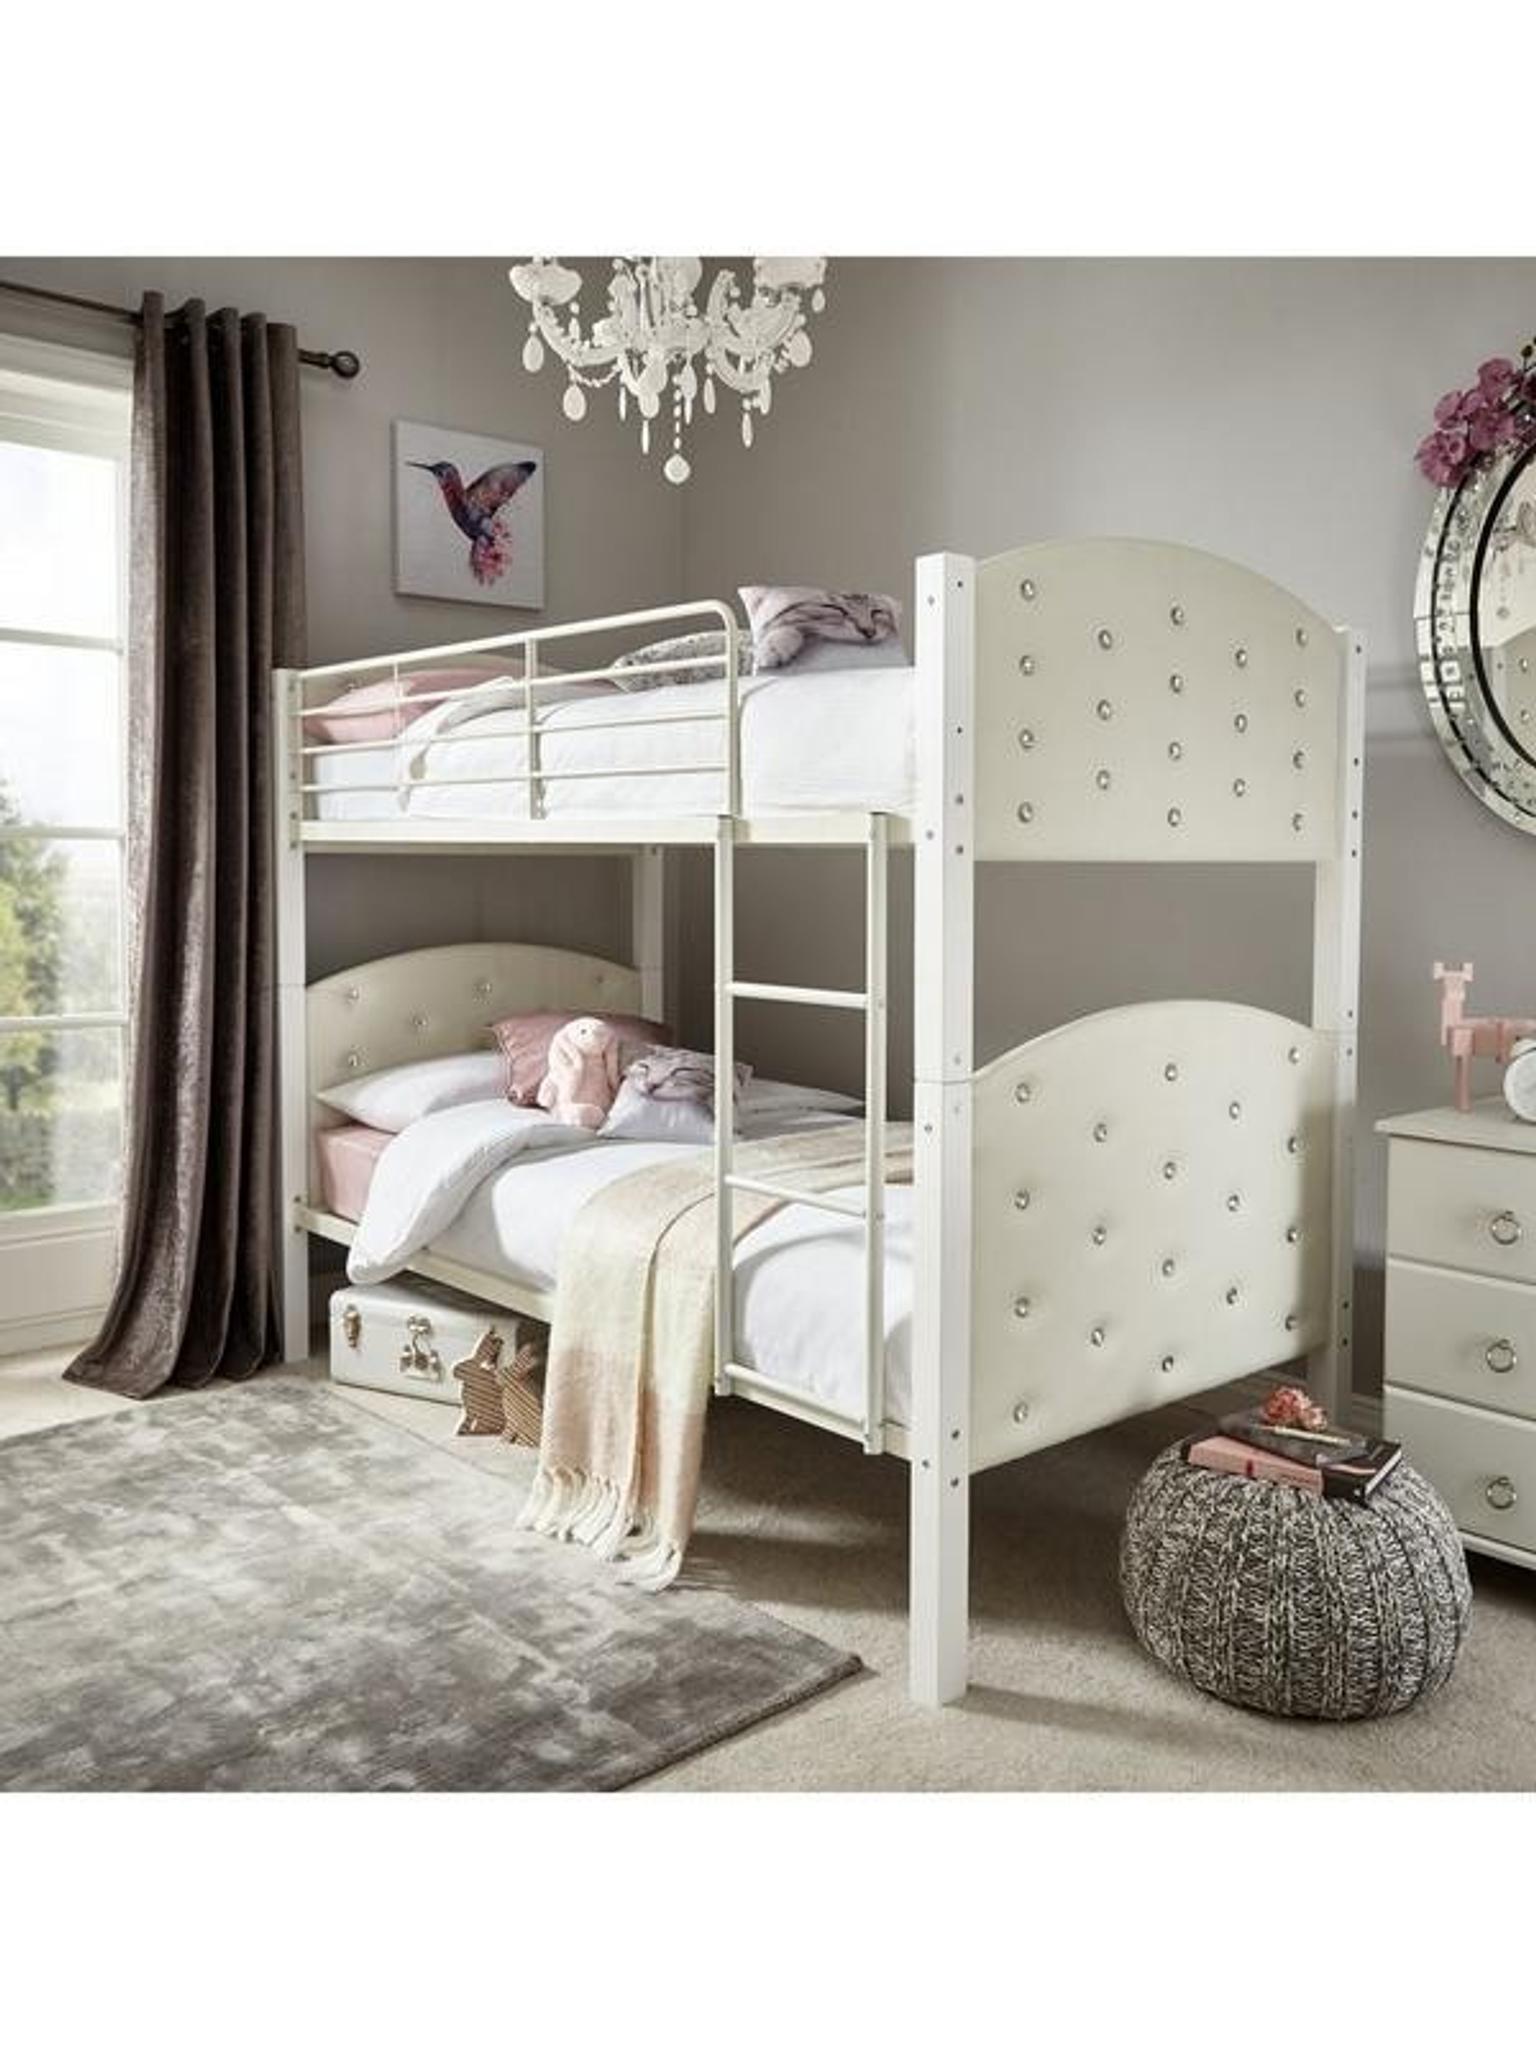 Bunk Beds In Ng15 Linby For 100 00, Leather Bunk Beds